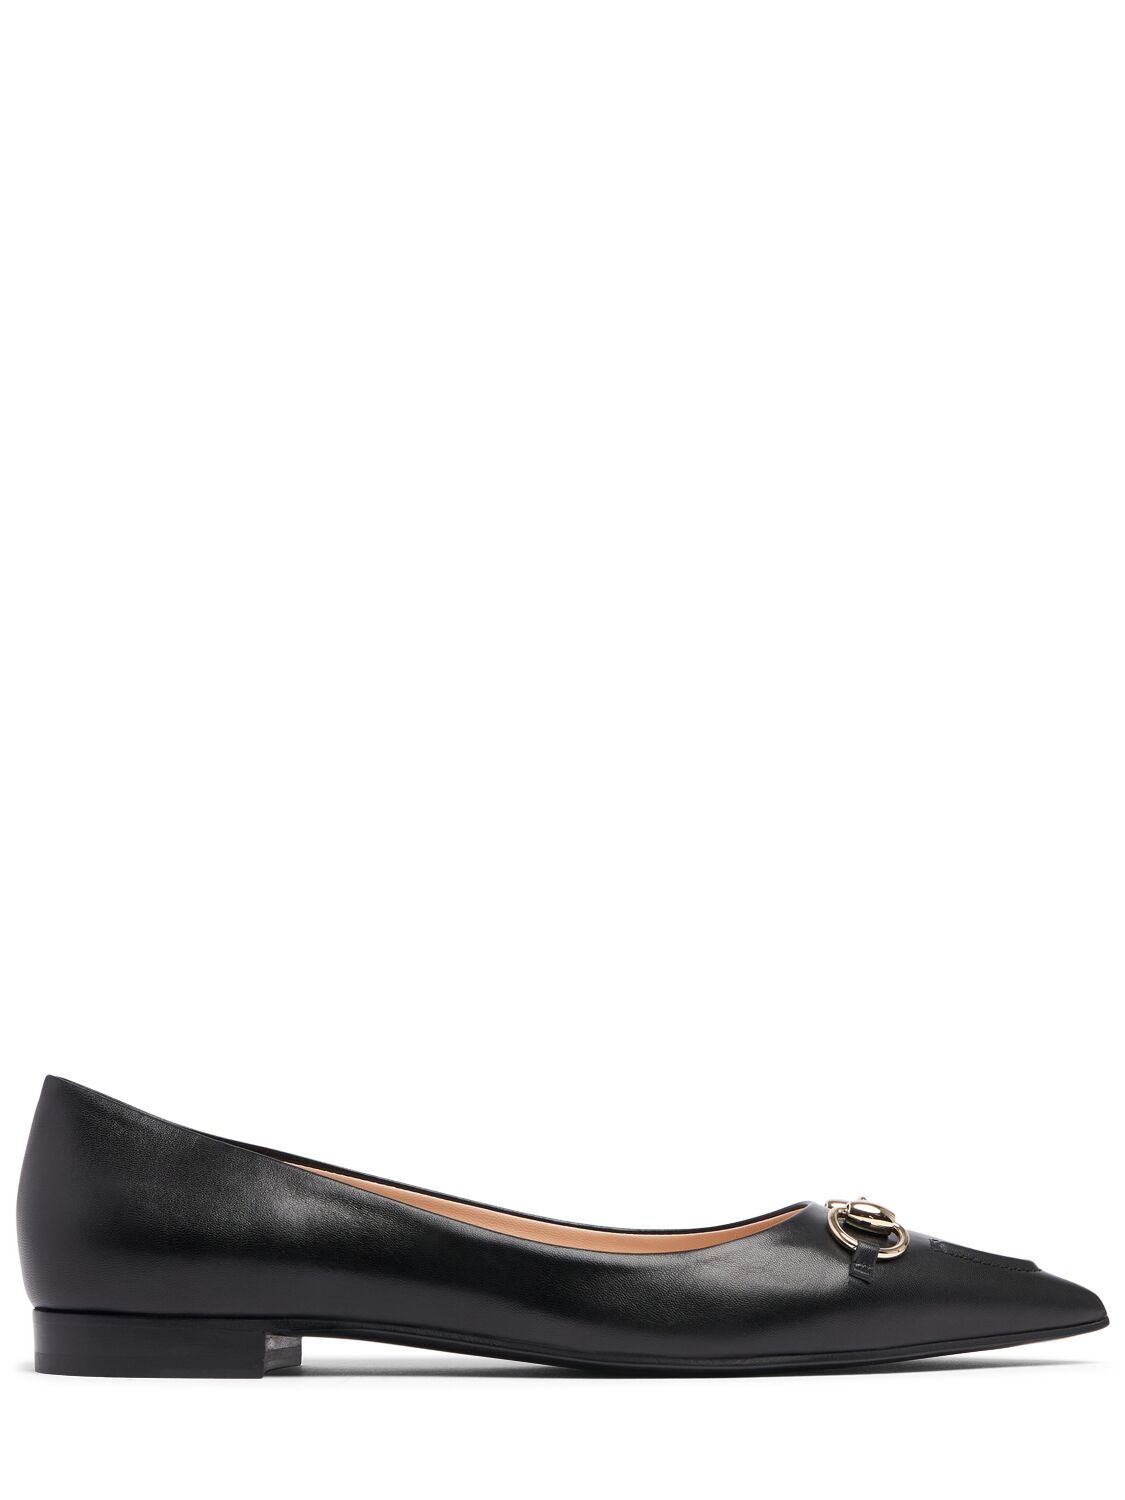 Gucci Erin Leather Ballet Flats In Black